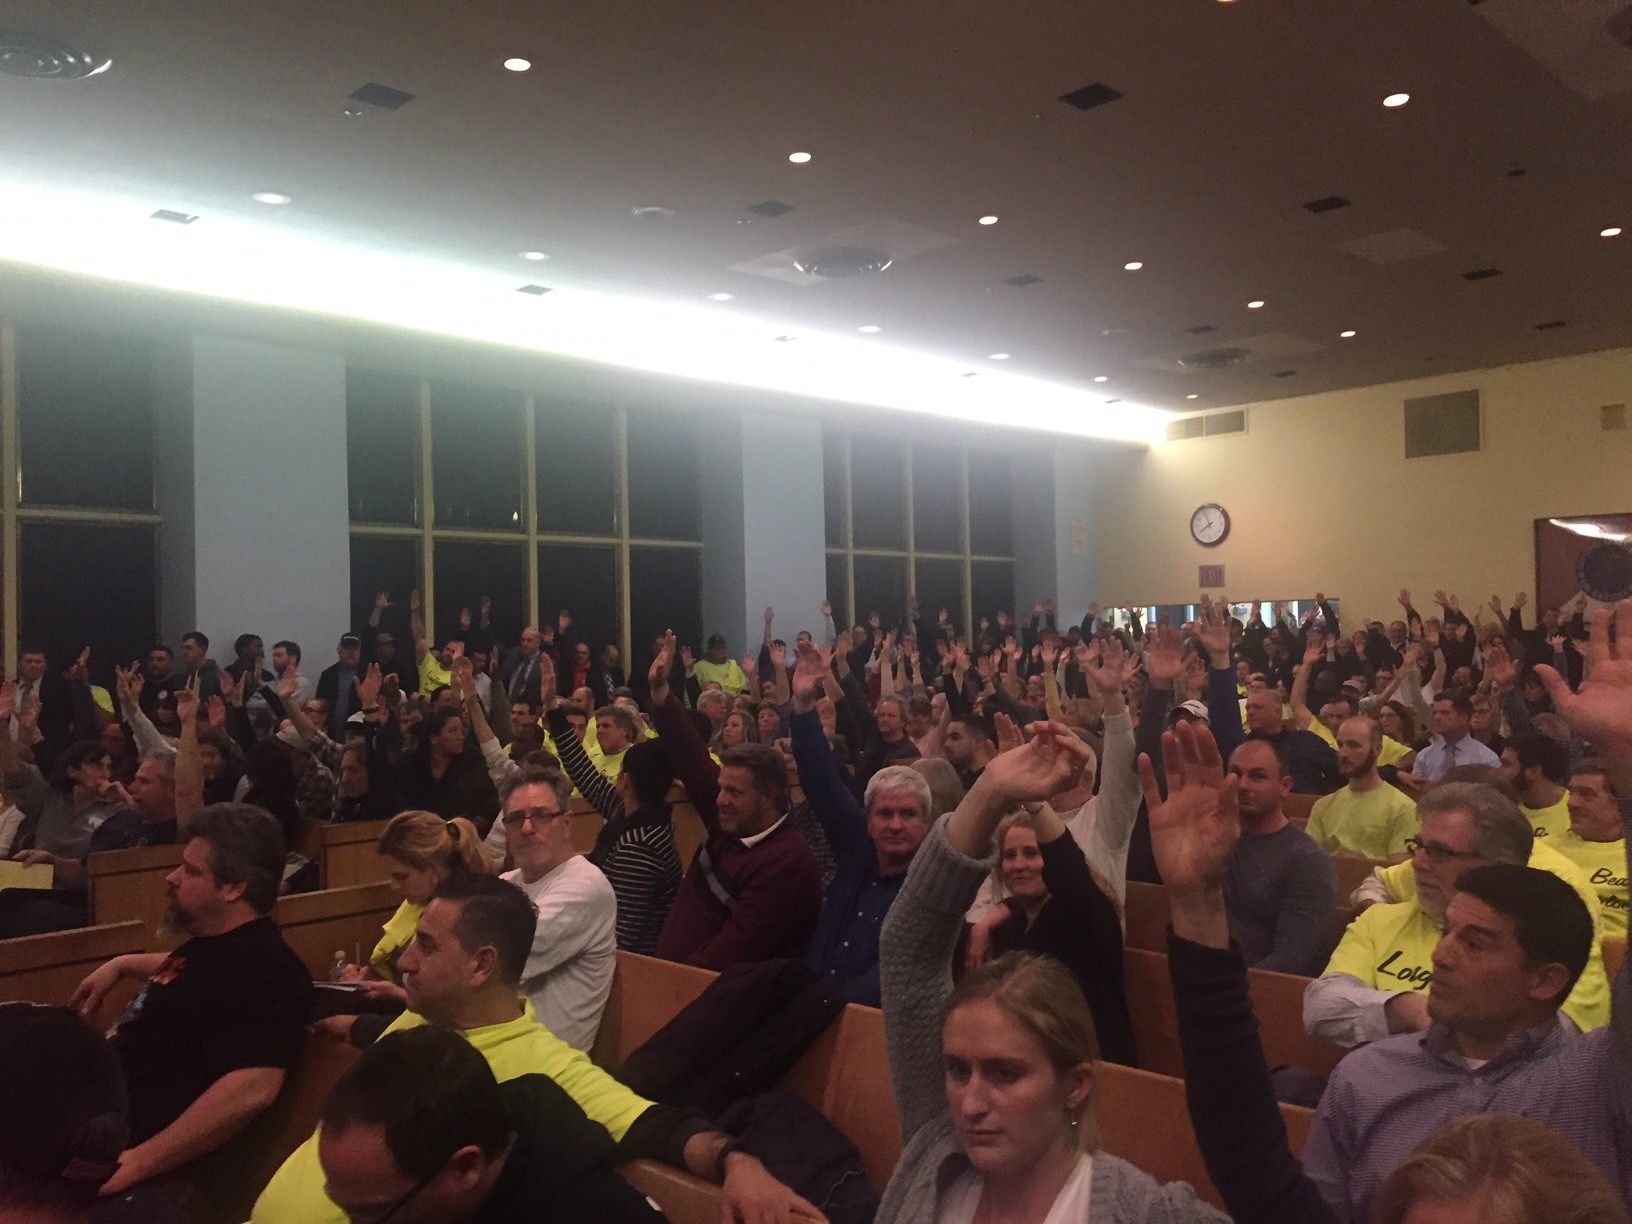 Hundreds of residents raised their hands when a speaker asked how many people in the crowd were from Long Beach. Photo by Anthony Rifilato/Herald